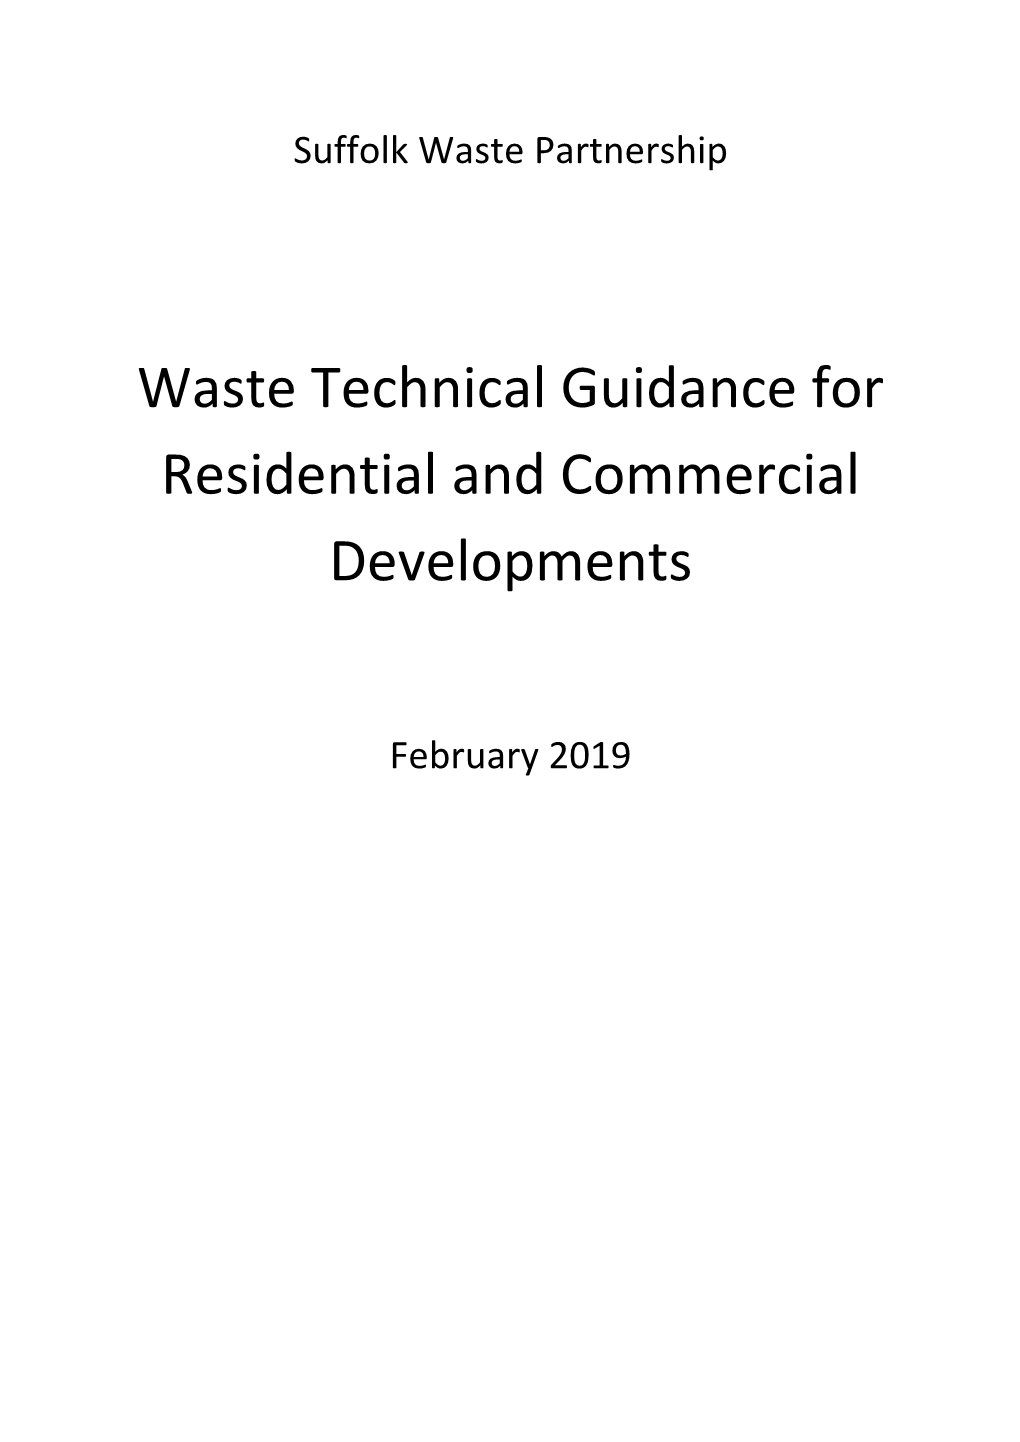 Waste Technical Guidance for Residential and Commercial Developments